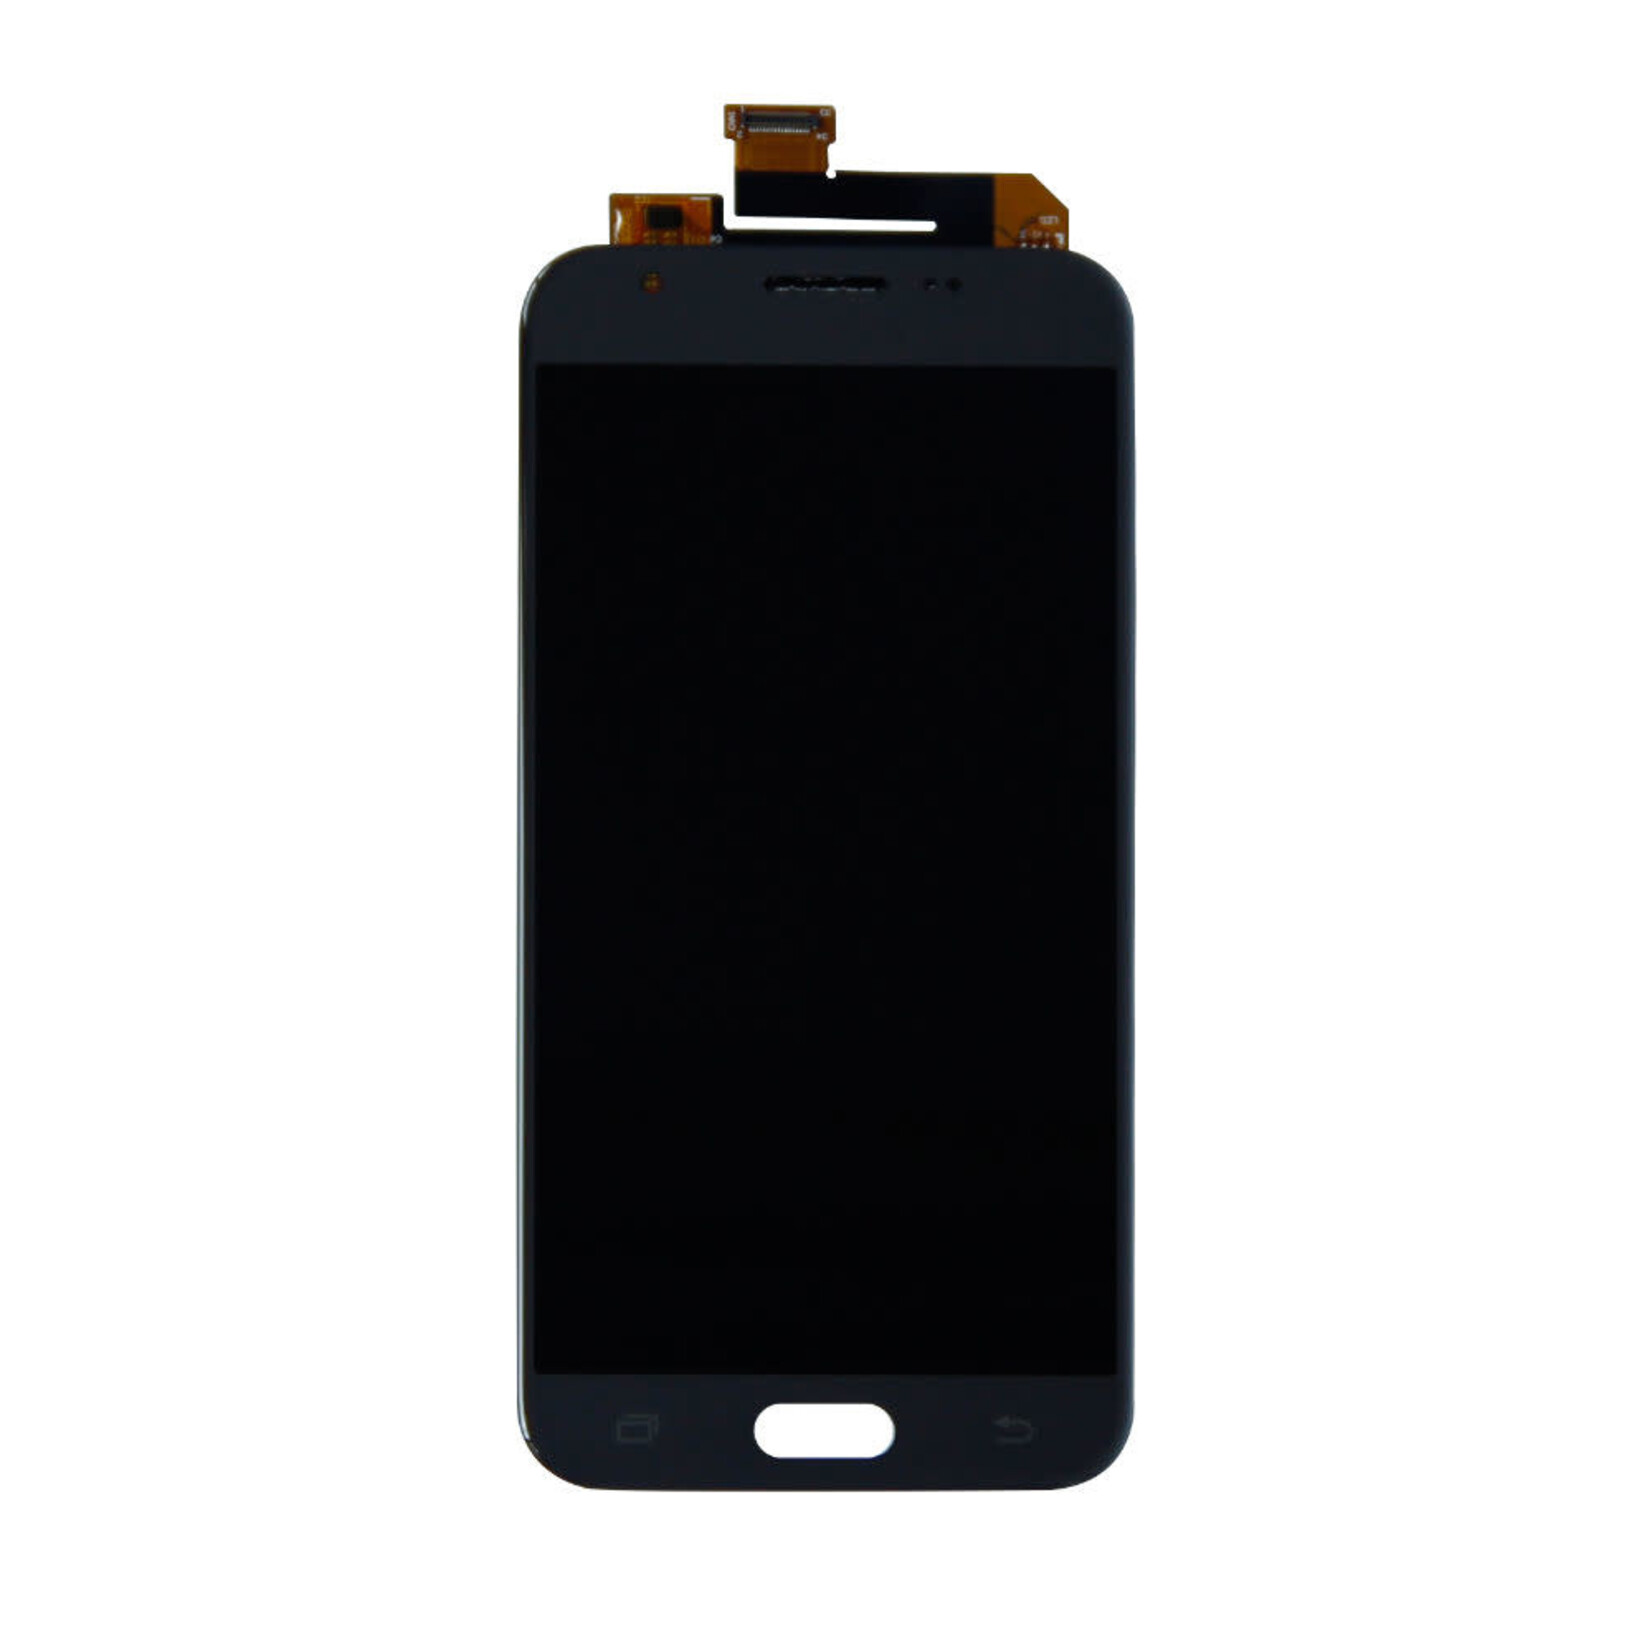 Samsung LCD DIGITIZER ASSEMBLY FOR SAMSUNG GALAXY J3 PRIME J327